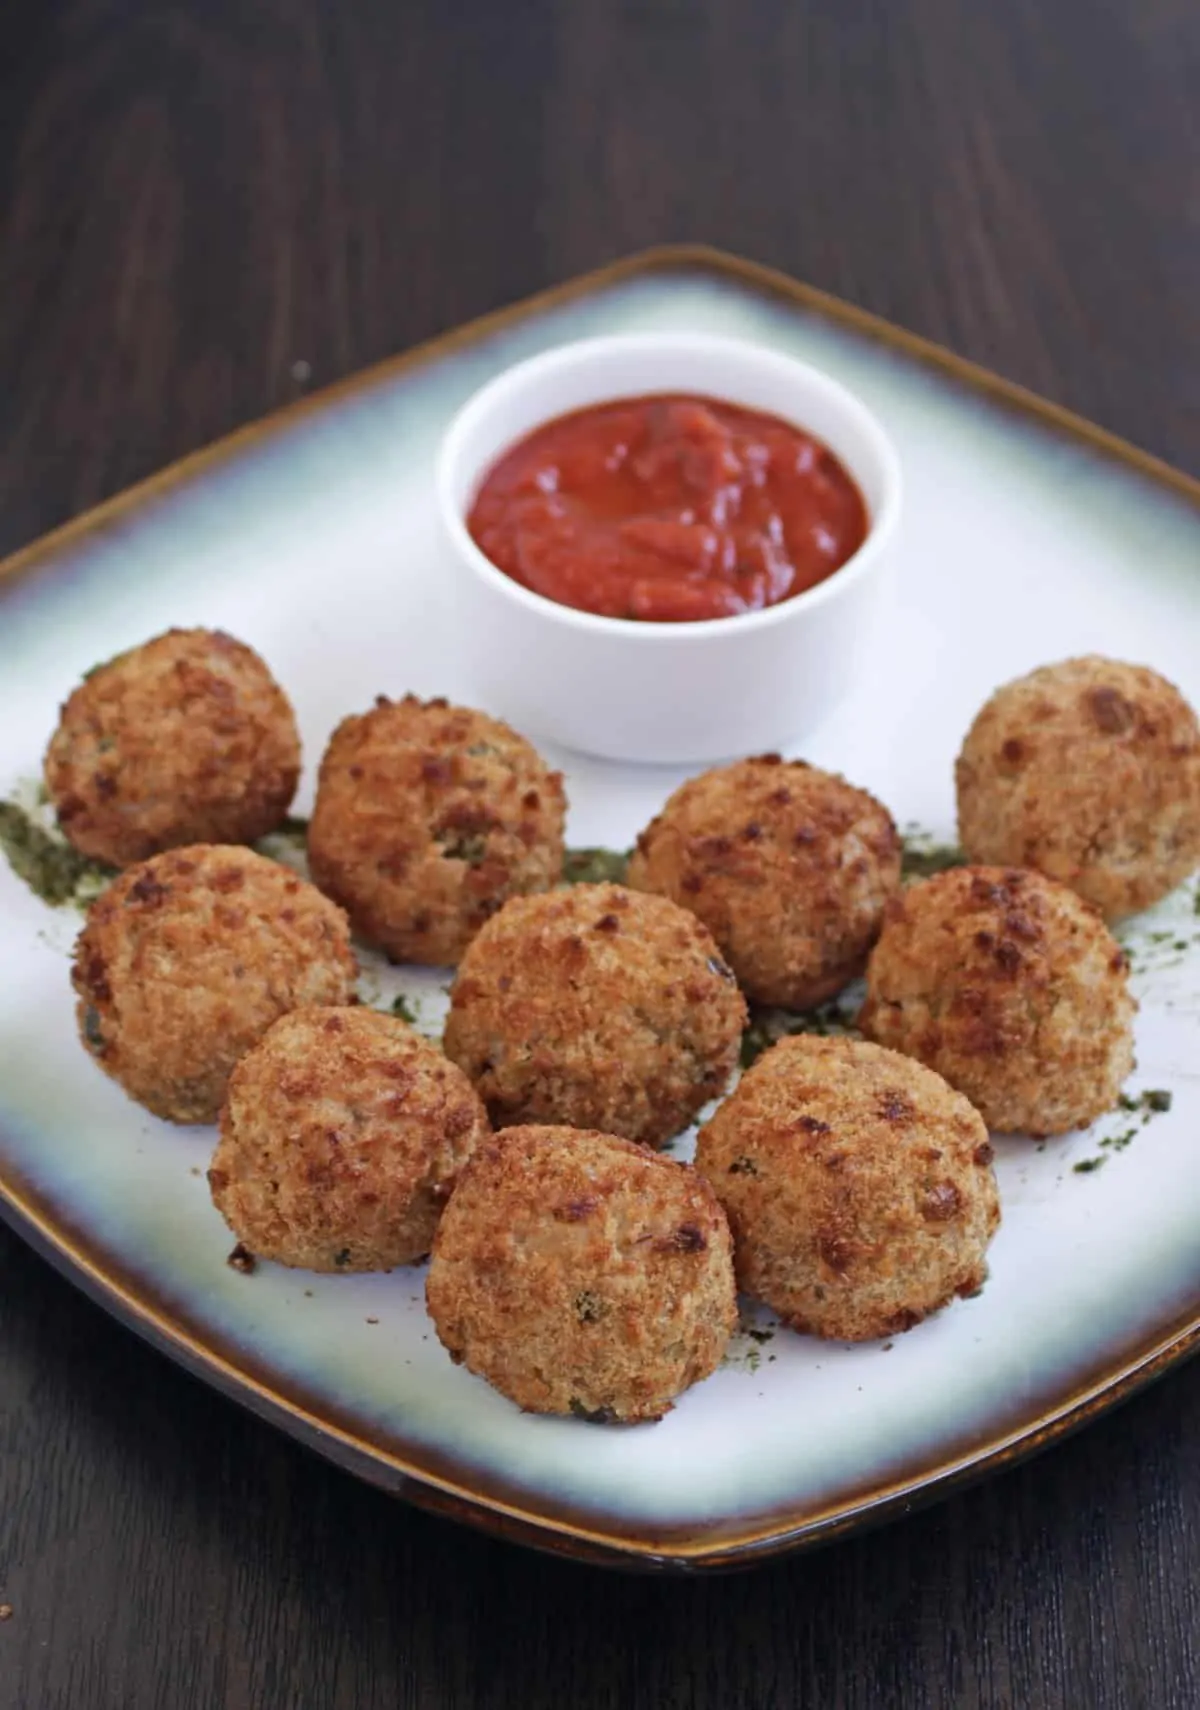 Arancini on a square white plate with tomato sauce in a dipping bowl.